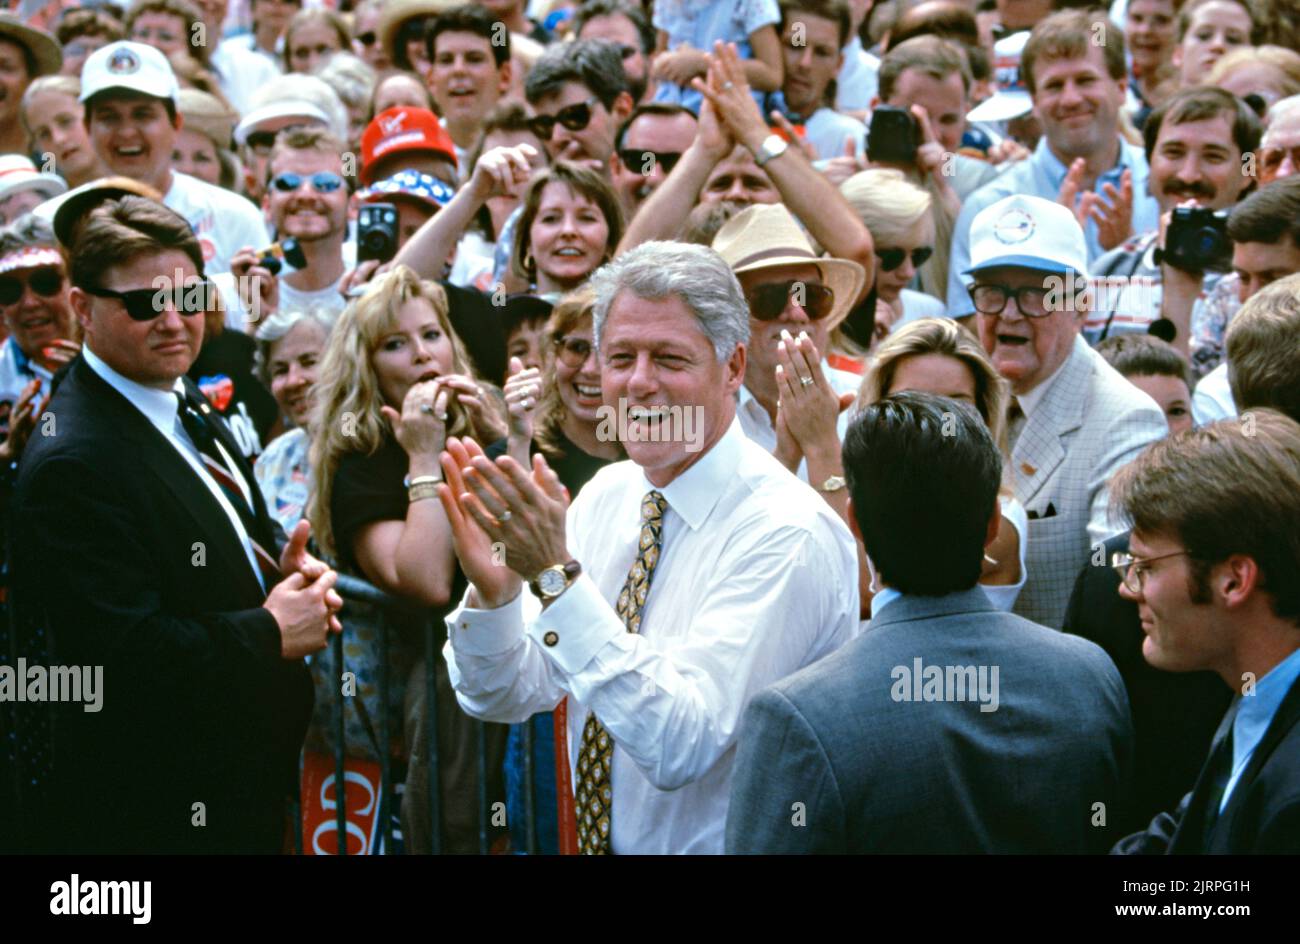 U.S. President Bill Clinton steps into the crowd to take a selfie with crowds of supporters during a campaign rally outside the Stafford Public Library, August 30, 1996 in Cairo, Illinois. Clinton stopped in the Southern Illinois farming community on his campaign bus tour named the bridge to the 21st century. Stock Photo